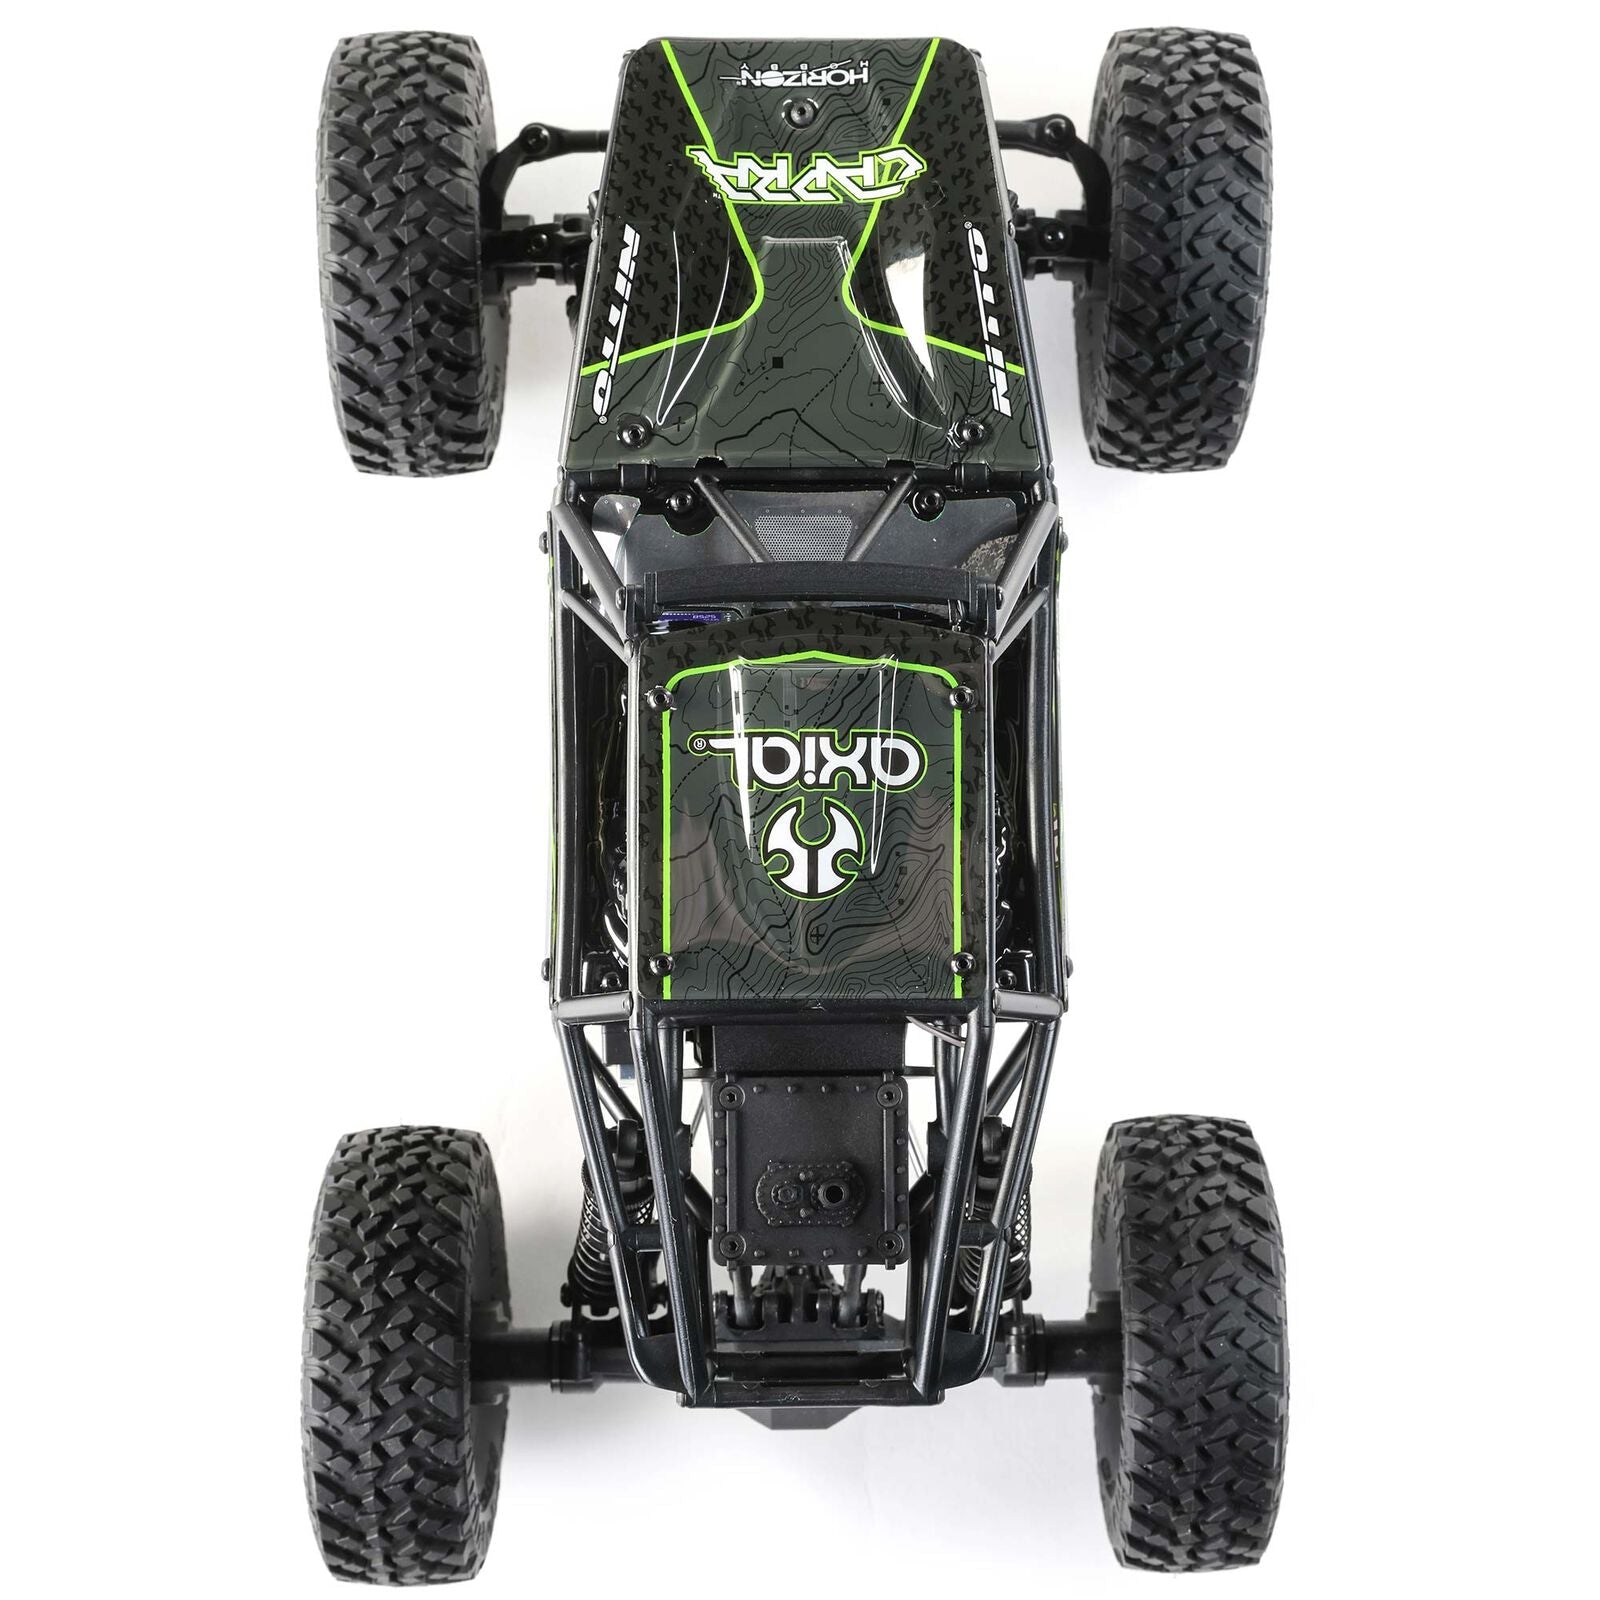 Axial 1/18 UTB18 Capra 4WD Unlimited Trail Buggy RTR - Black - HeliDirect